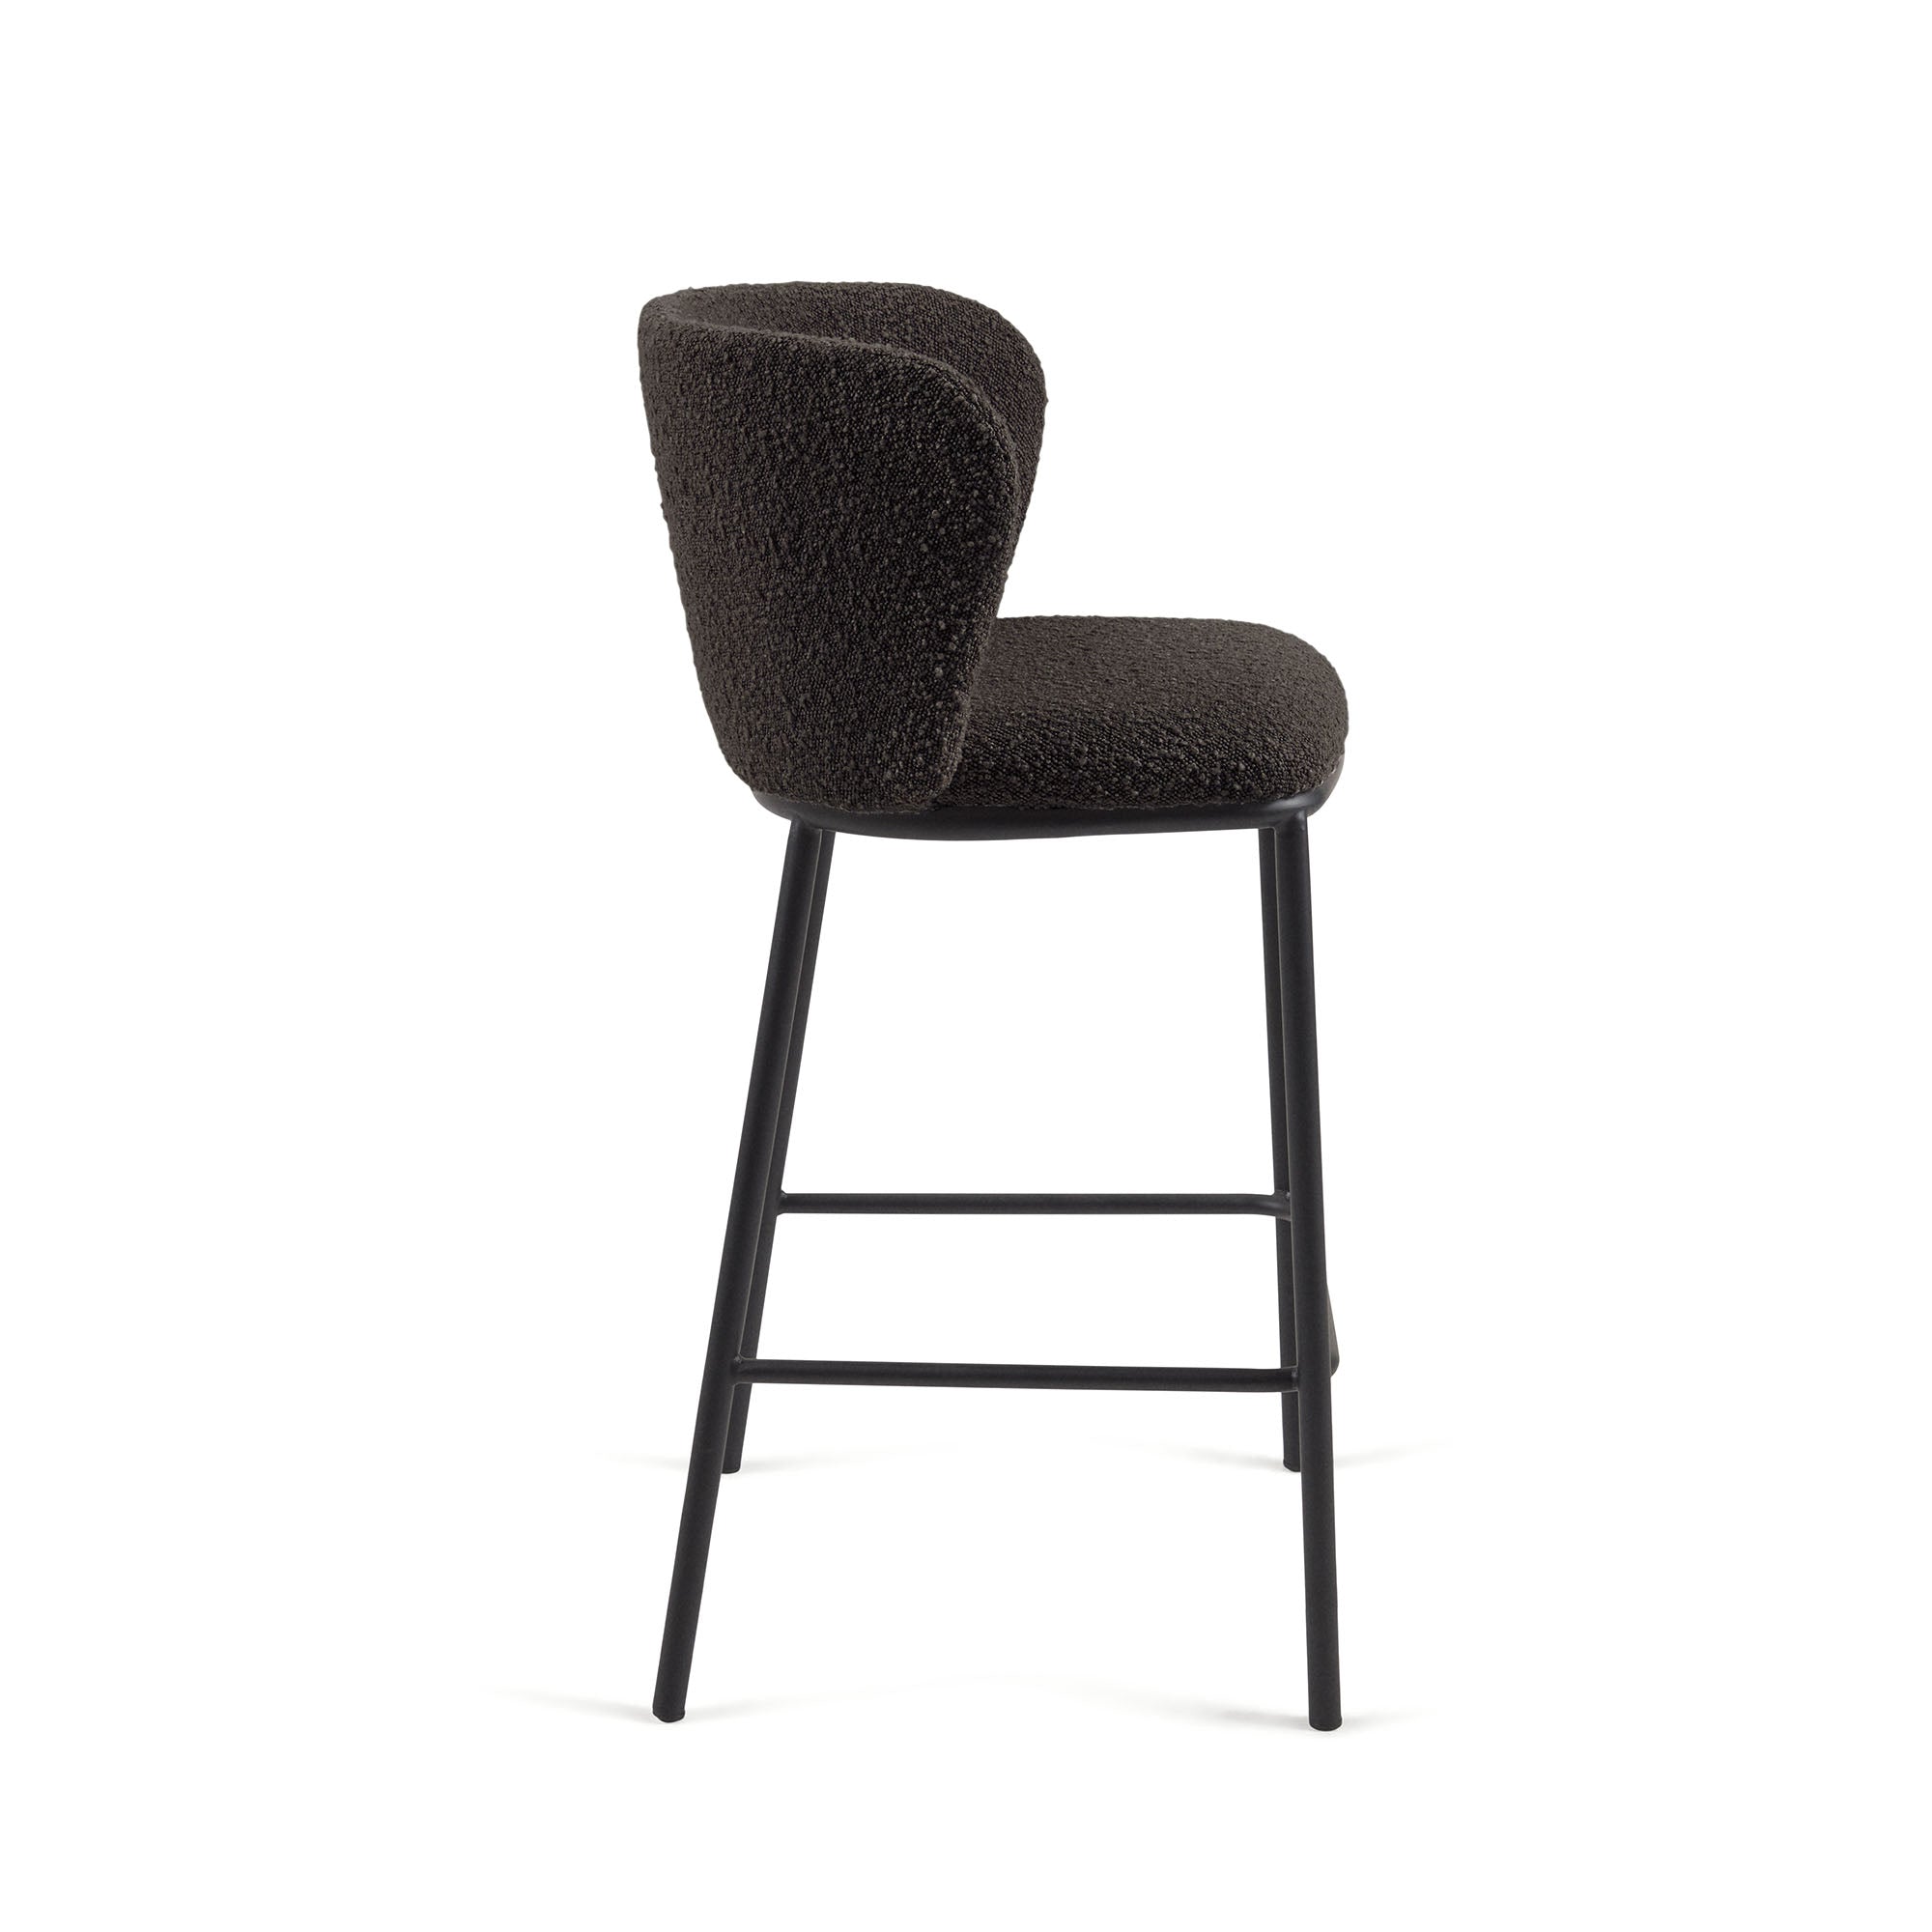 Ciselia stool with black shearling and black metal, height 65 cm